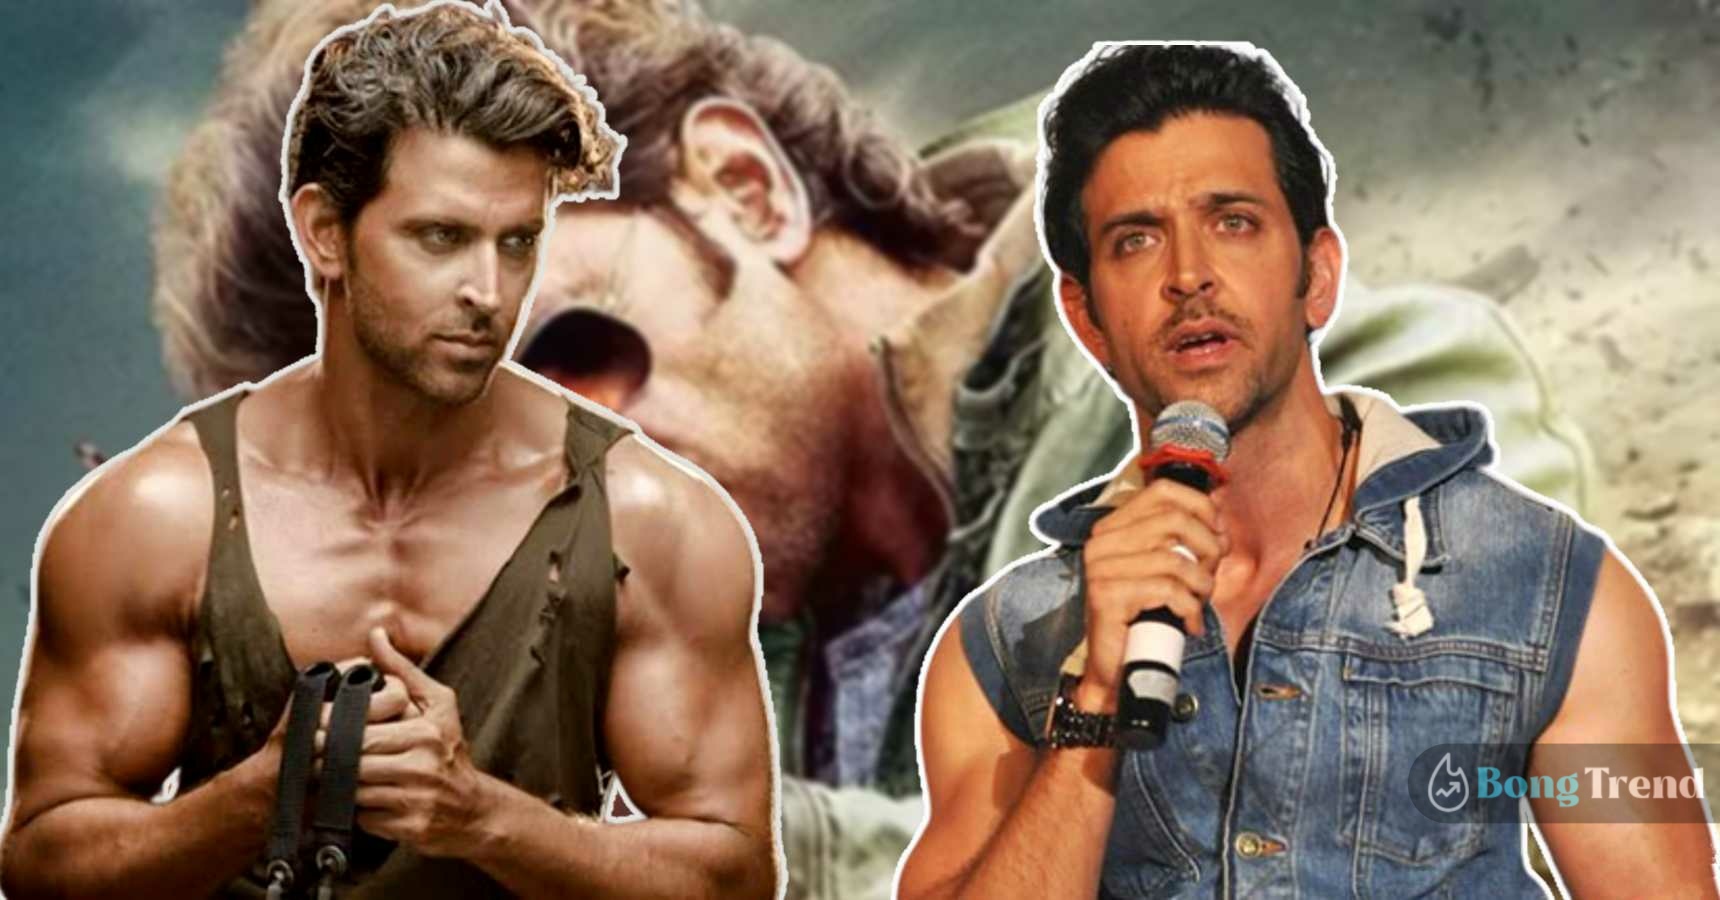 Bollywood Superstar Hrithik Roshan was told unfit to dance by Doctor